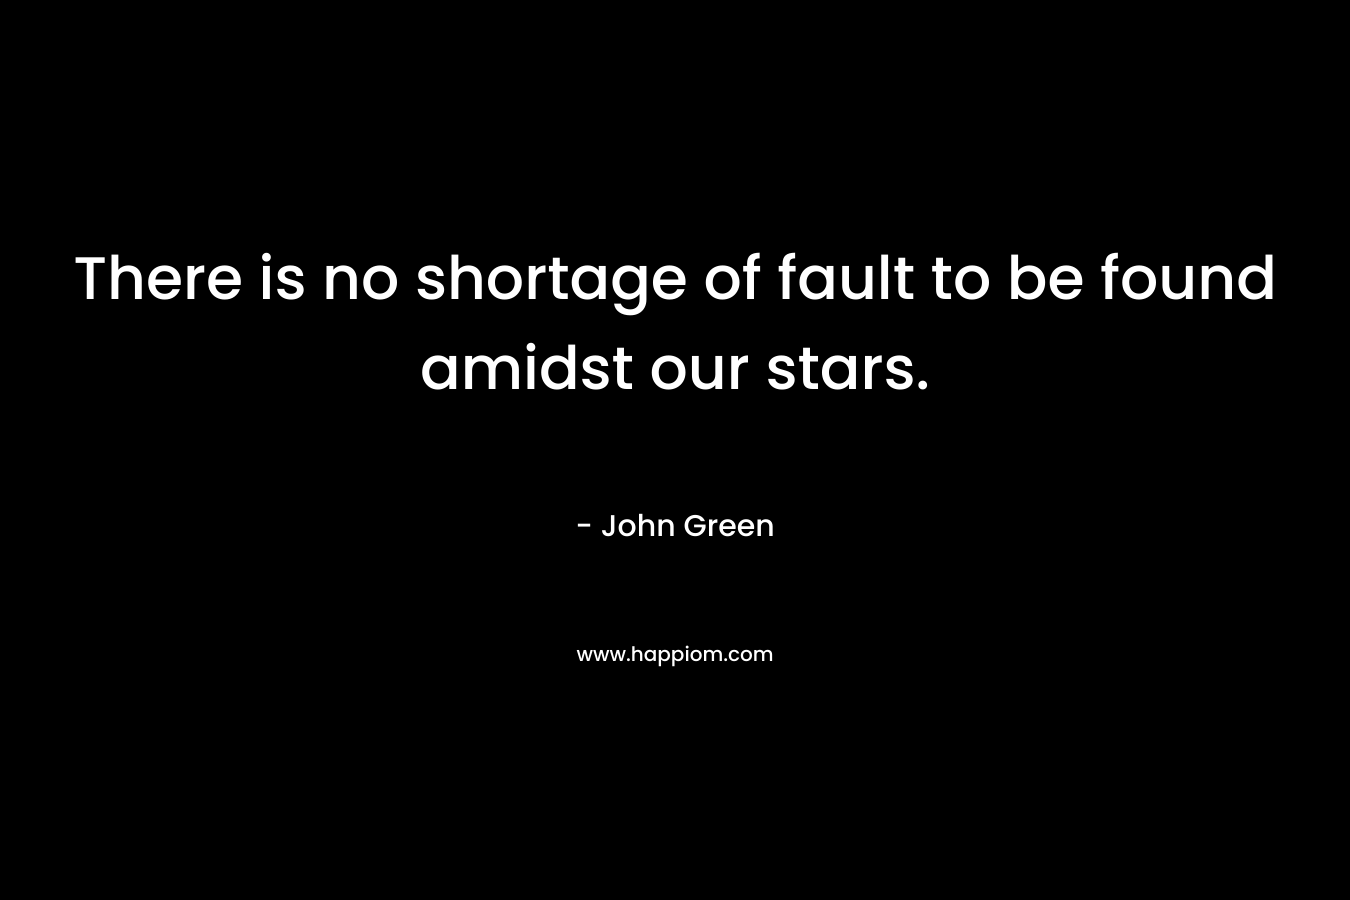 There is no shortage of fault to be found amidst our stars. – John Green